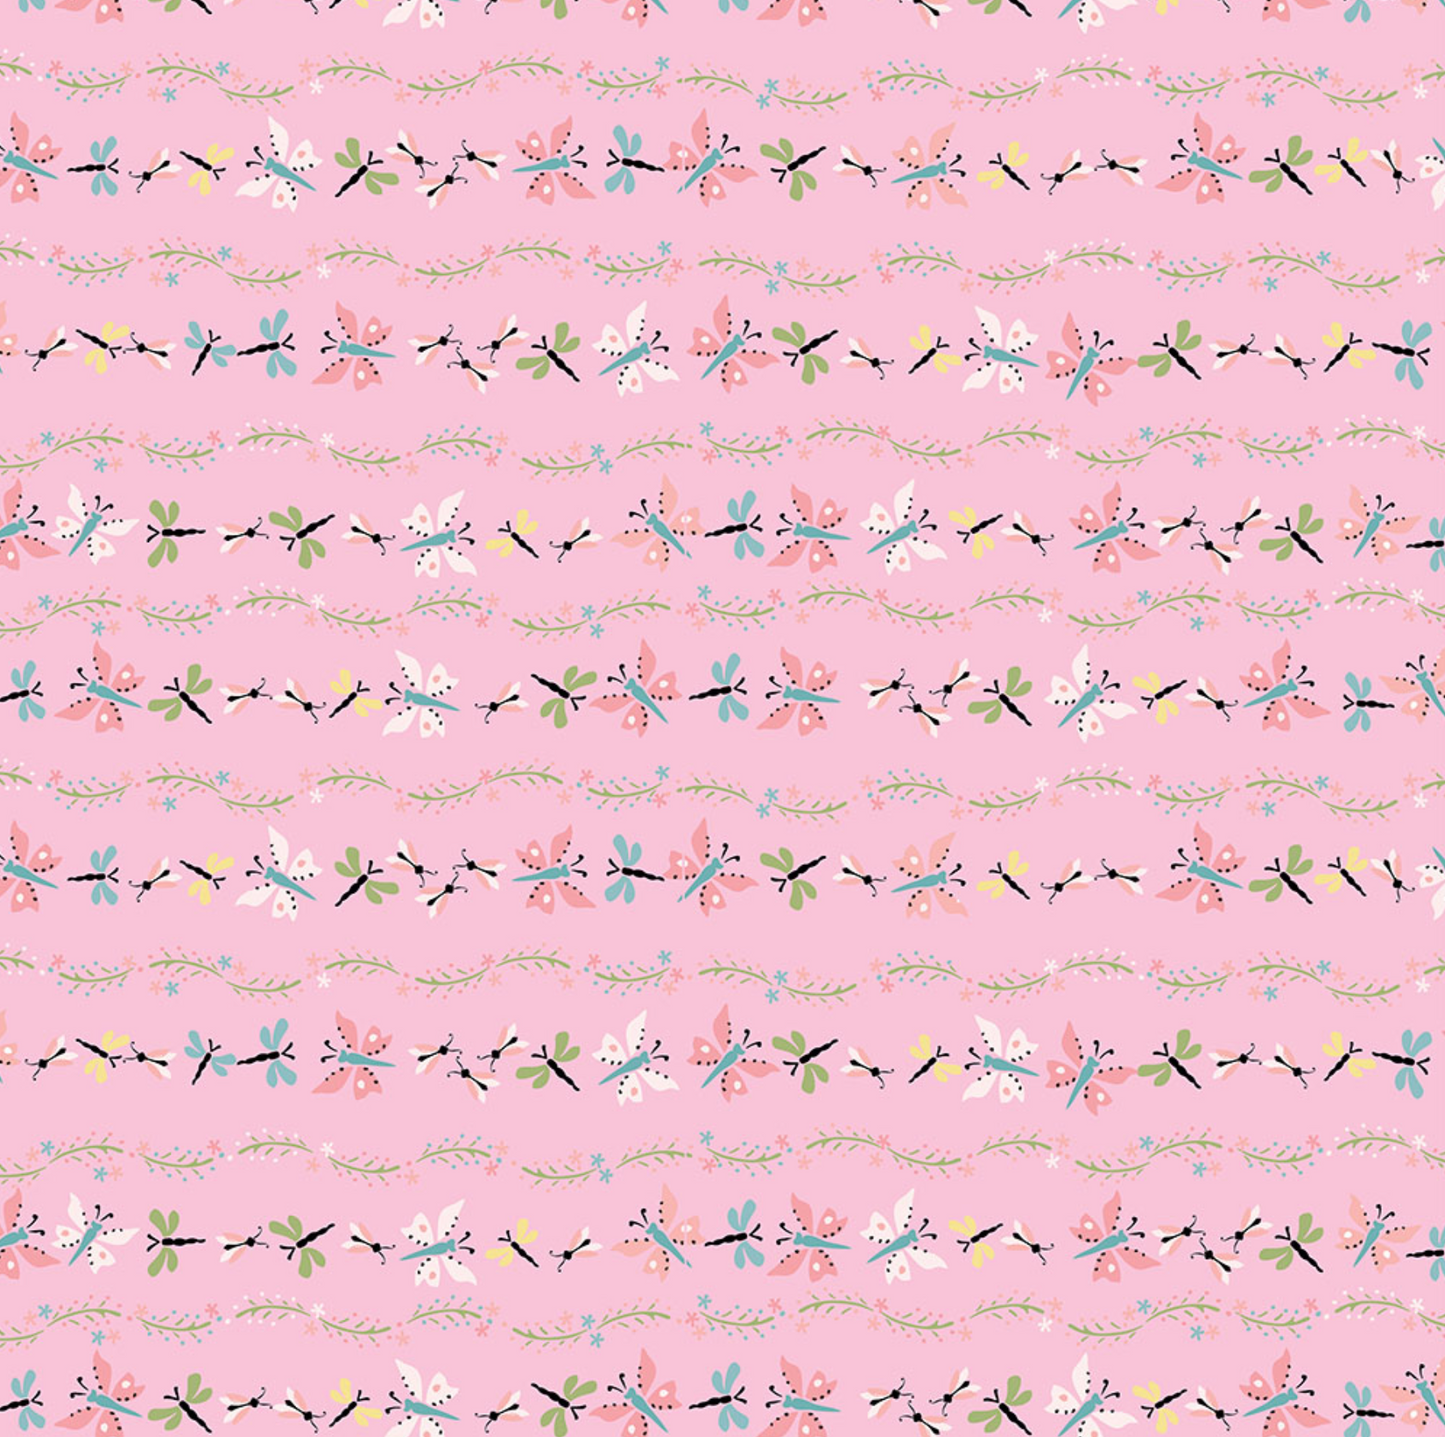 Finding Wonder Fabric, Butterflies and Bugs, Pink, FW24208, sold by the 1/2 yard, *PREORDER